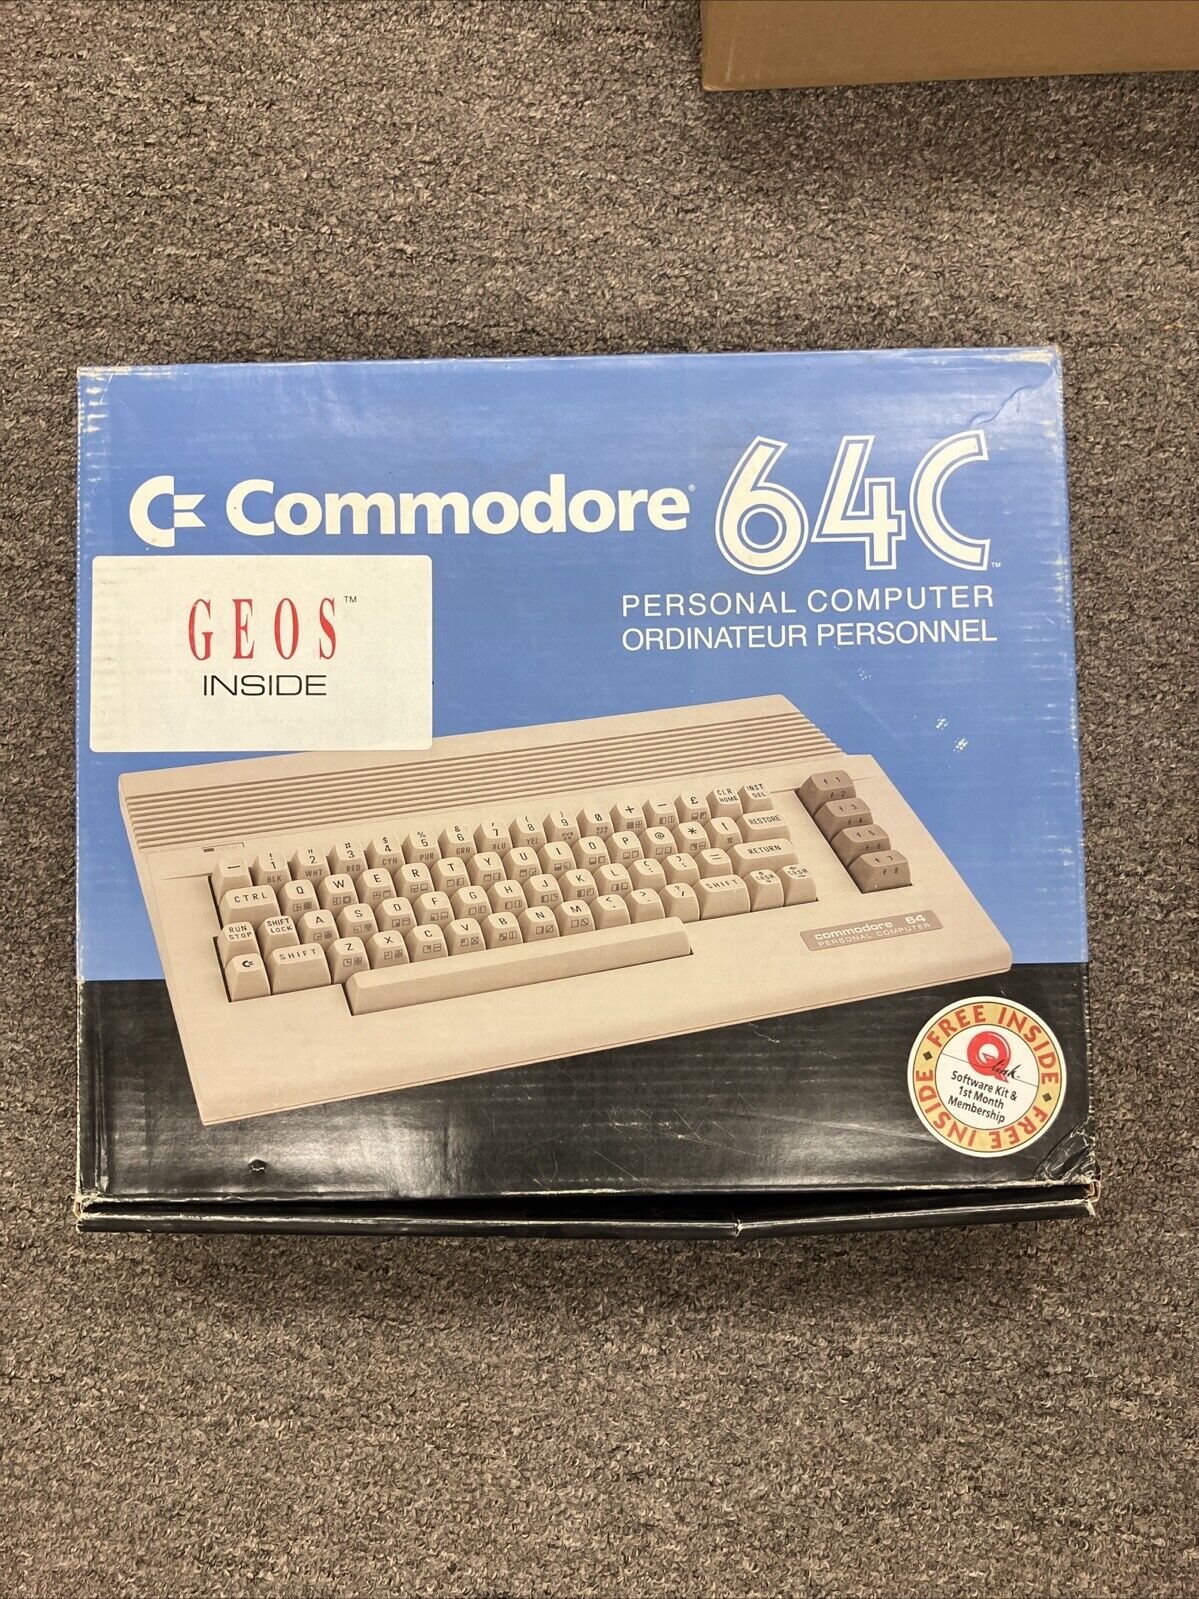 Make An Offer Commodore 64 NIB Never Used. Deck Only, No Cables. Box Looks Ok